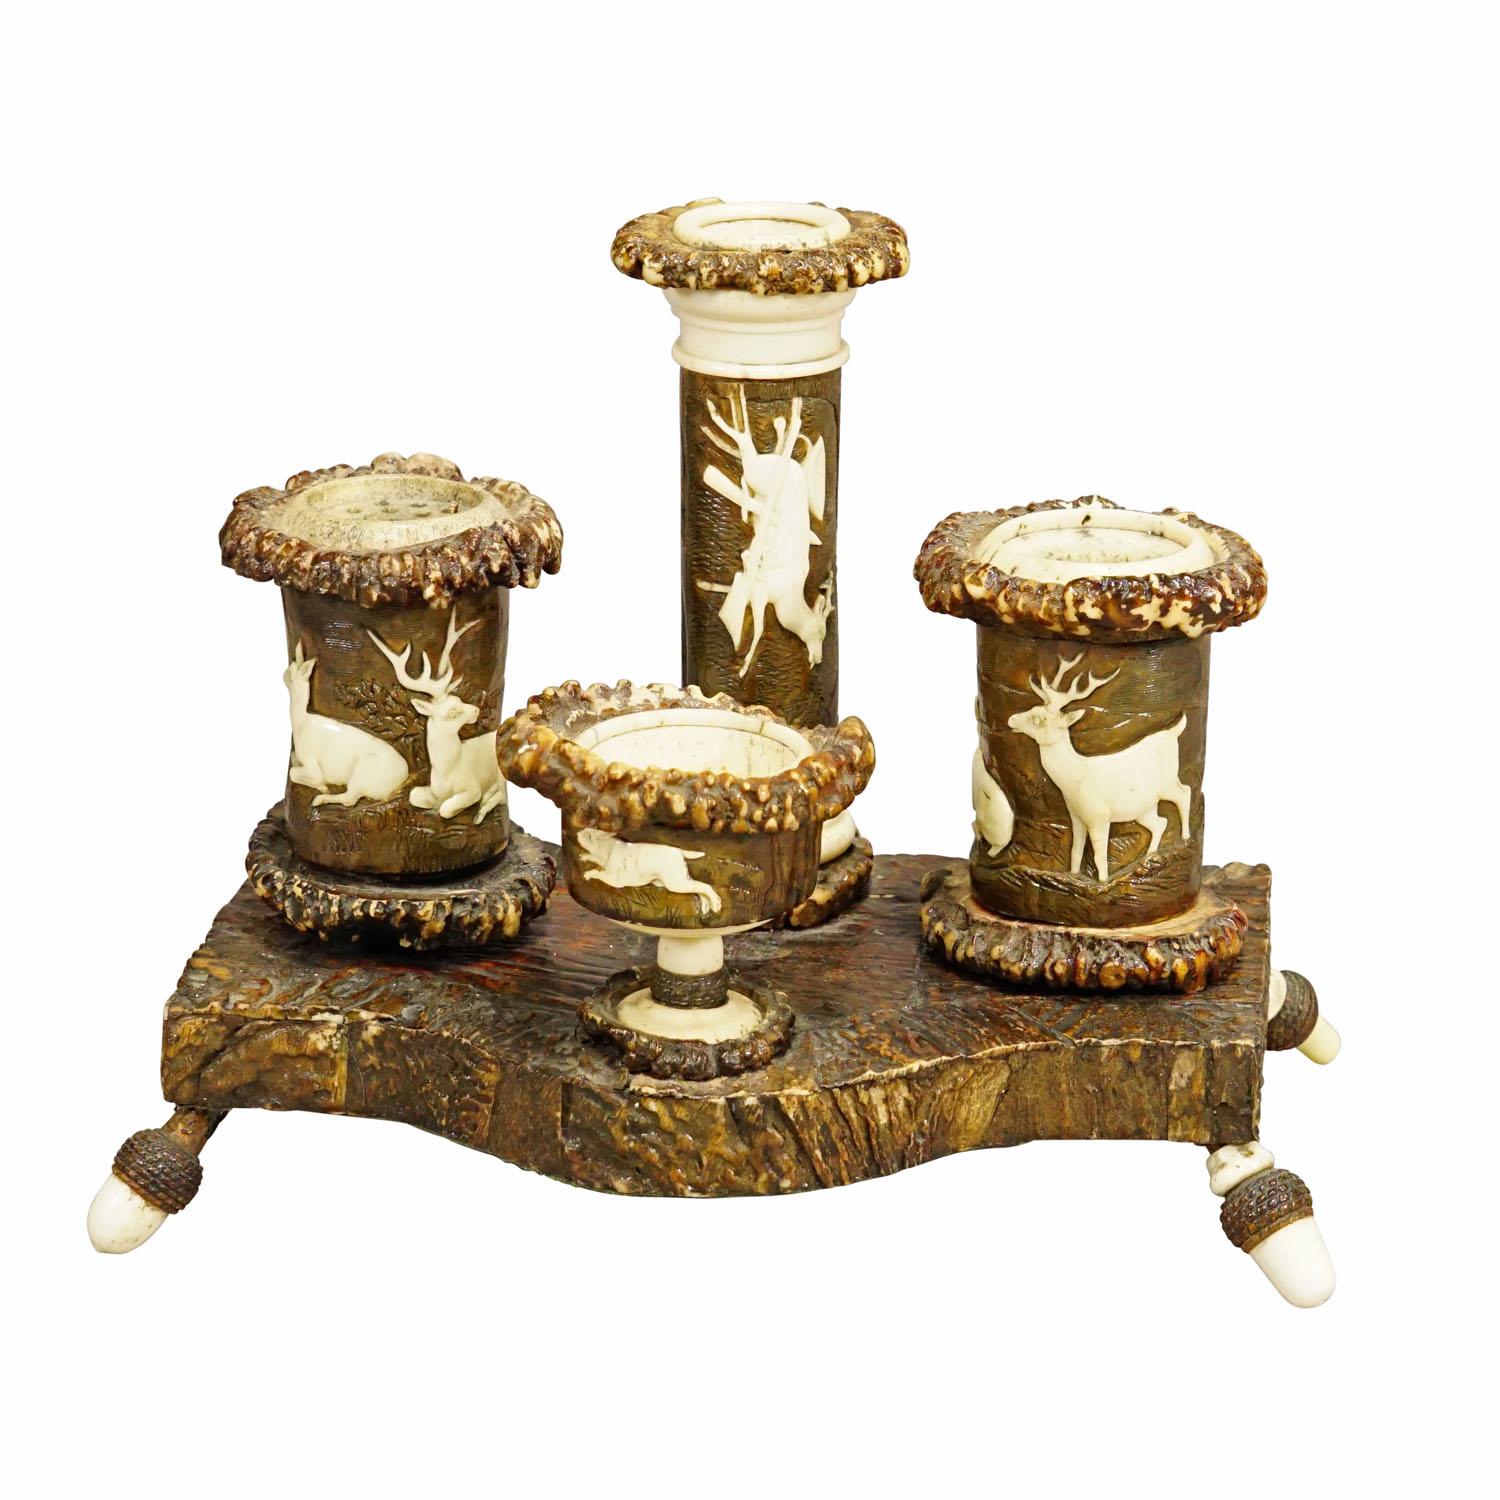 Rare Antler Desk Standish with Elaborate Carvings, Germany ca. 1840

A rare antique writing desk set made of wood and original antlers decorated with fine carved hunting scenes depicting deer families, game and staghond. The wooden base is